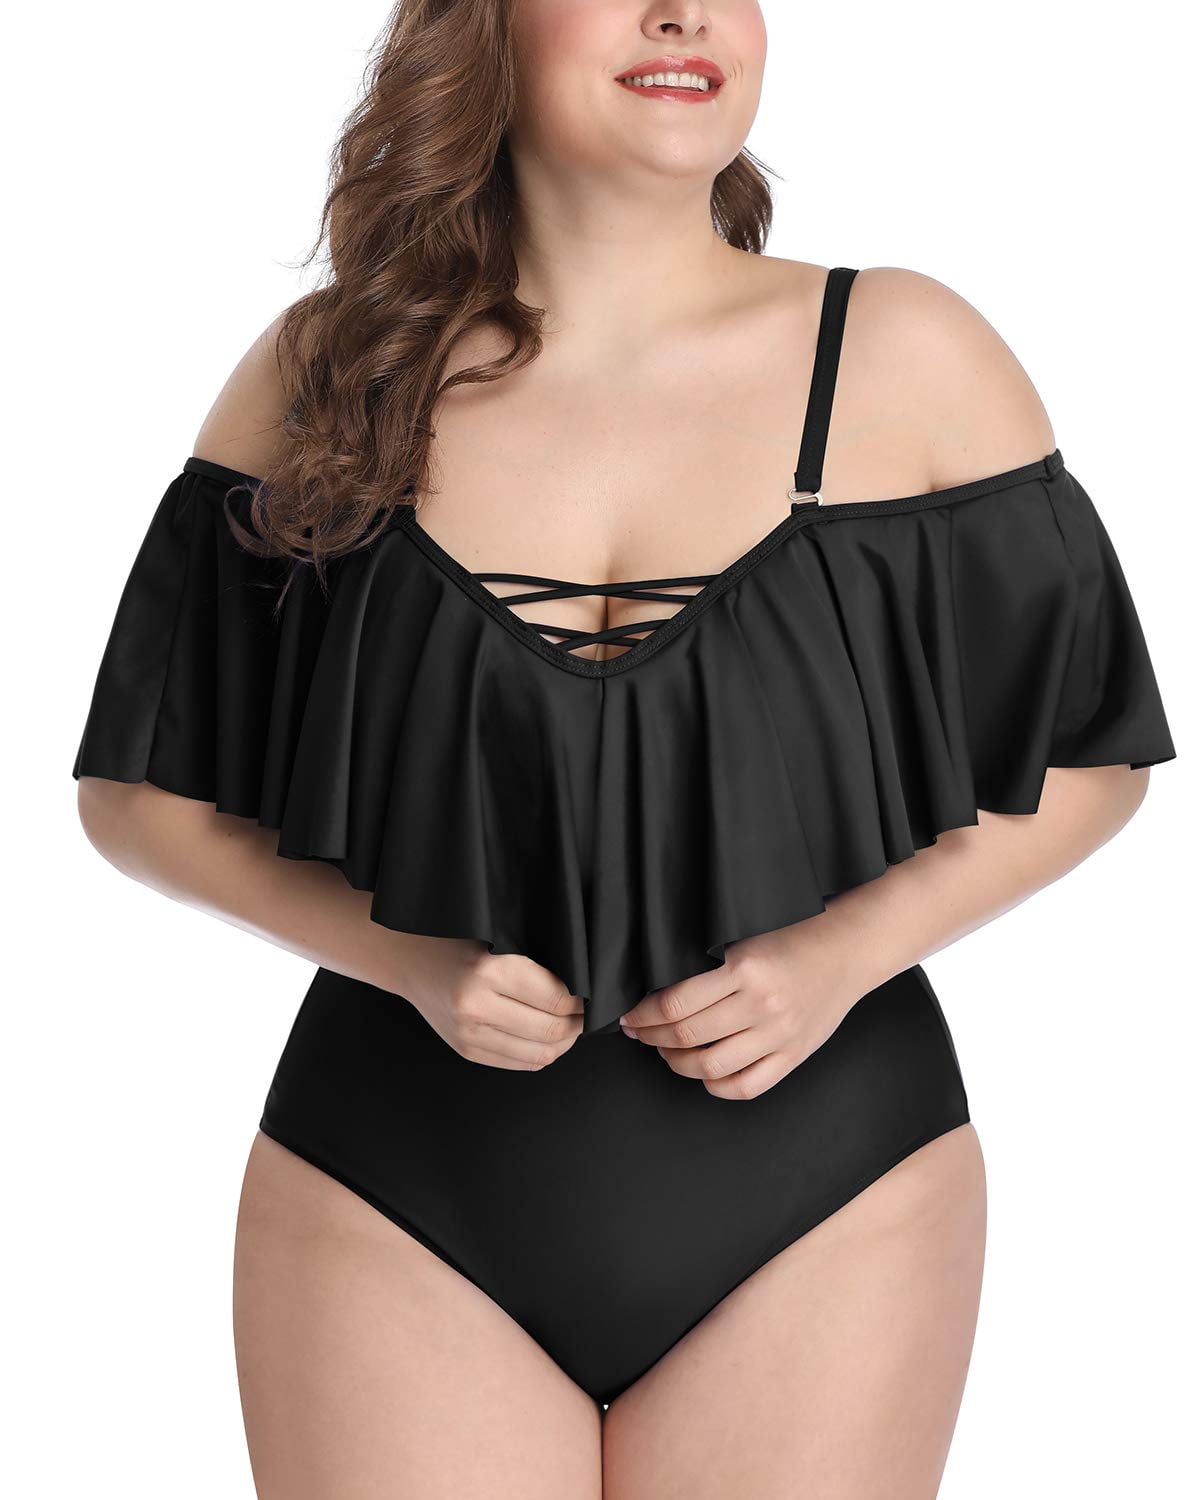 Women's Plus Size Ruffle One Piece Swimsuit Tummy Control Off the